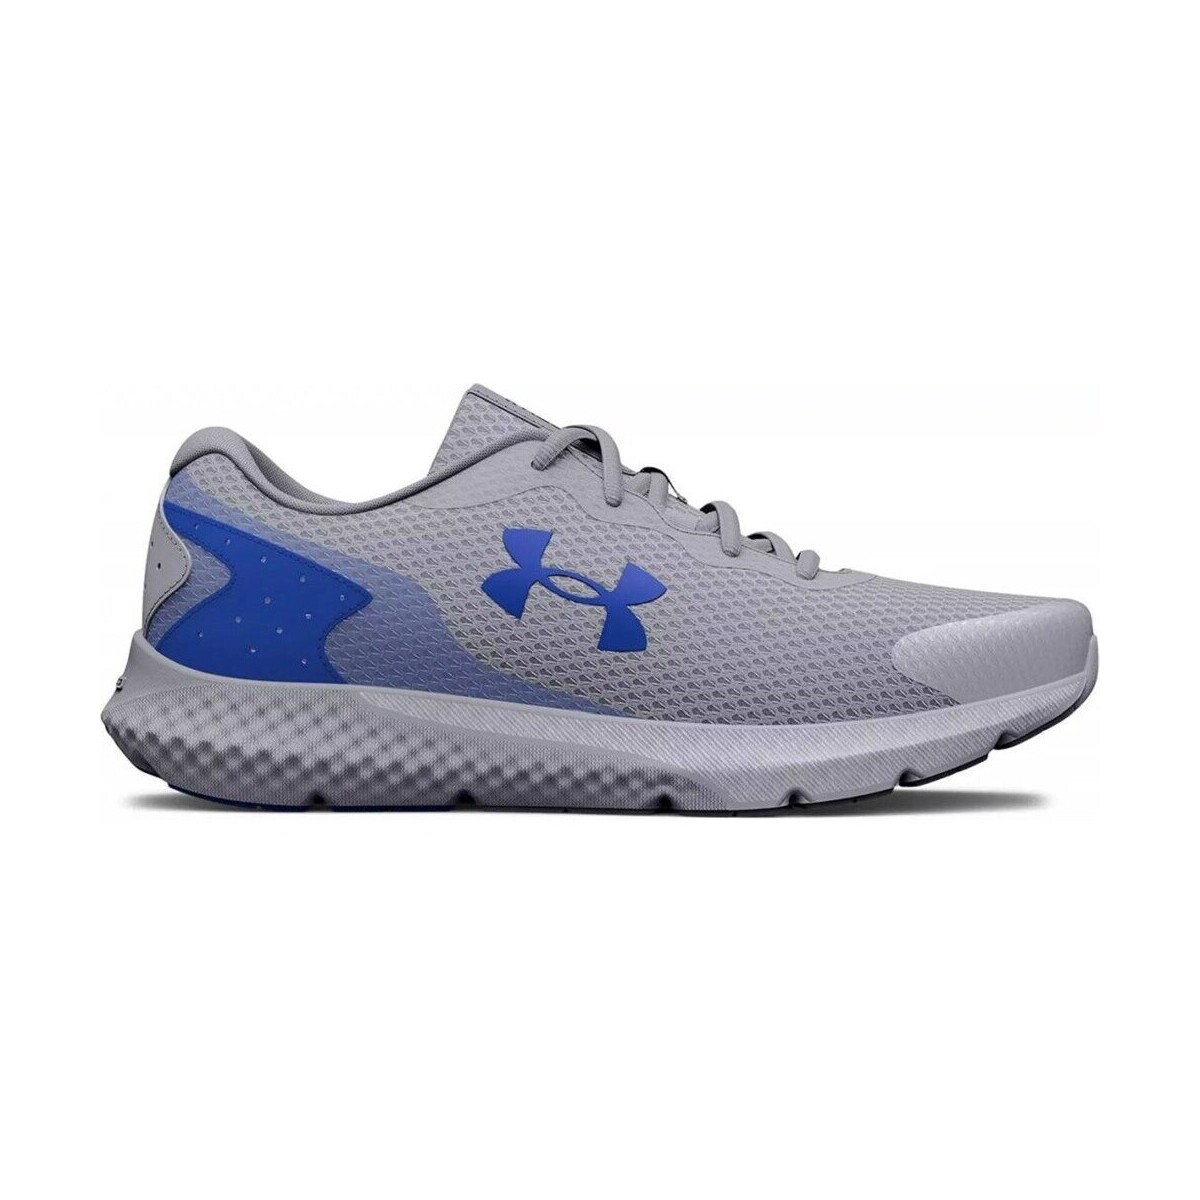 Shoes Men Running shoes Under Armour Charged Rouge Reflect Grey